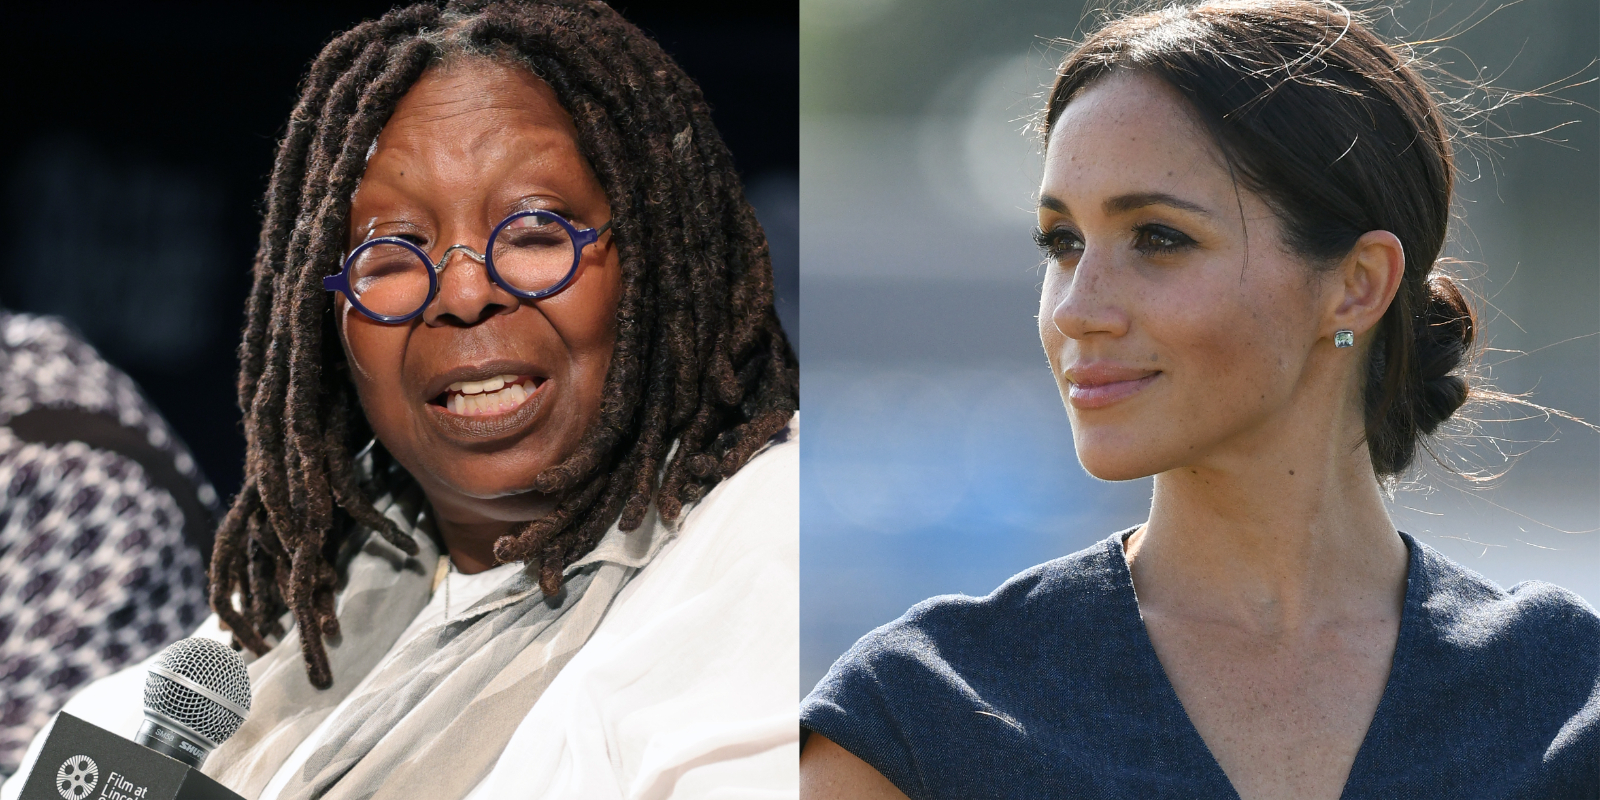 'The View' star Whoopi Goldberg and Meghan Markle in side by side images.